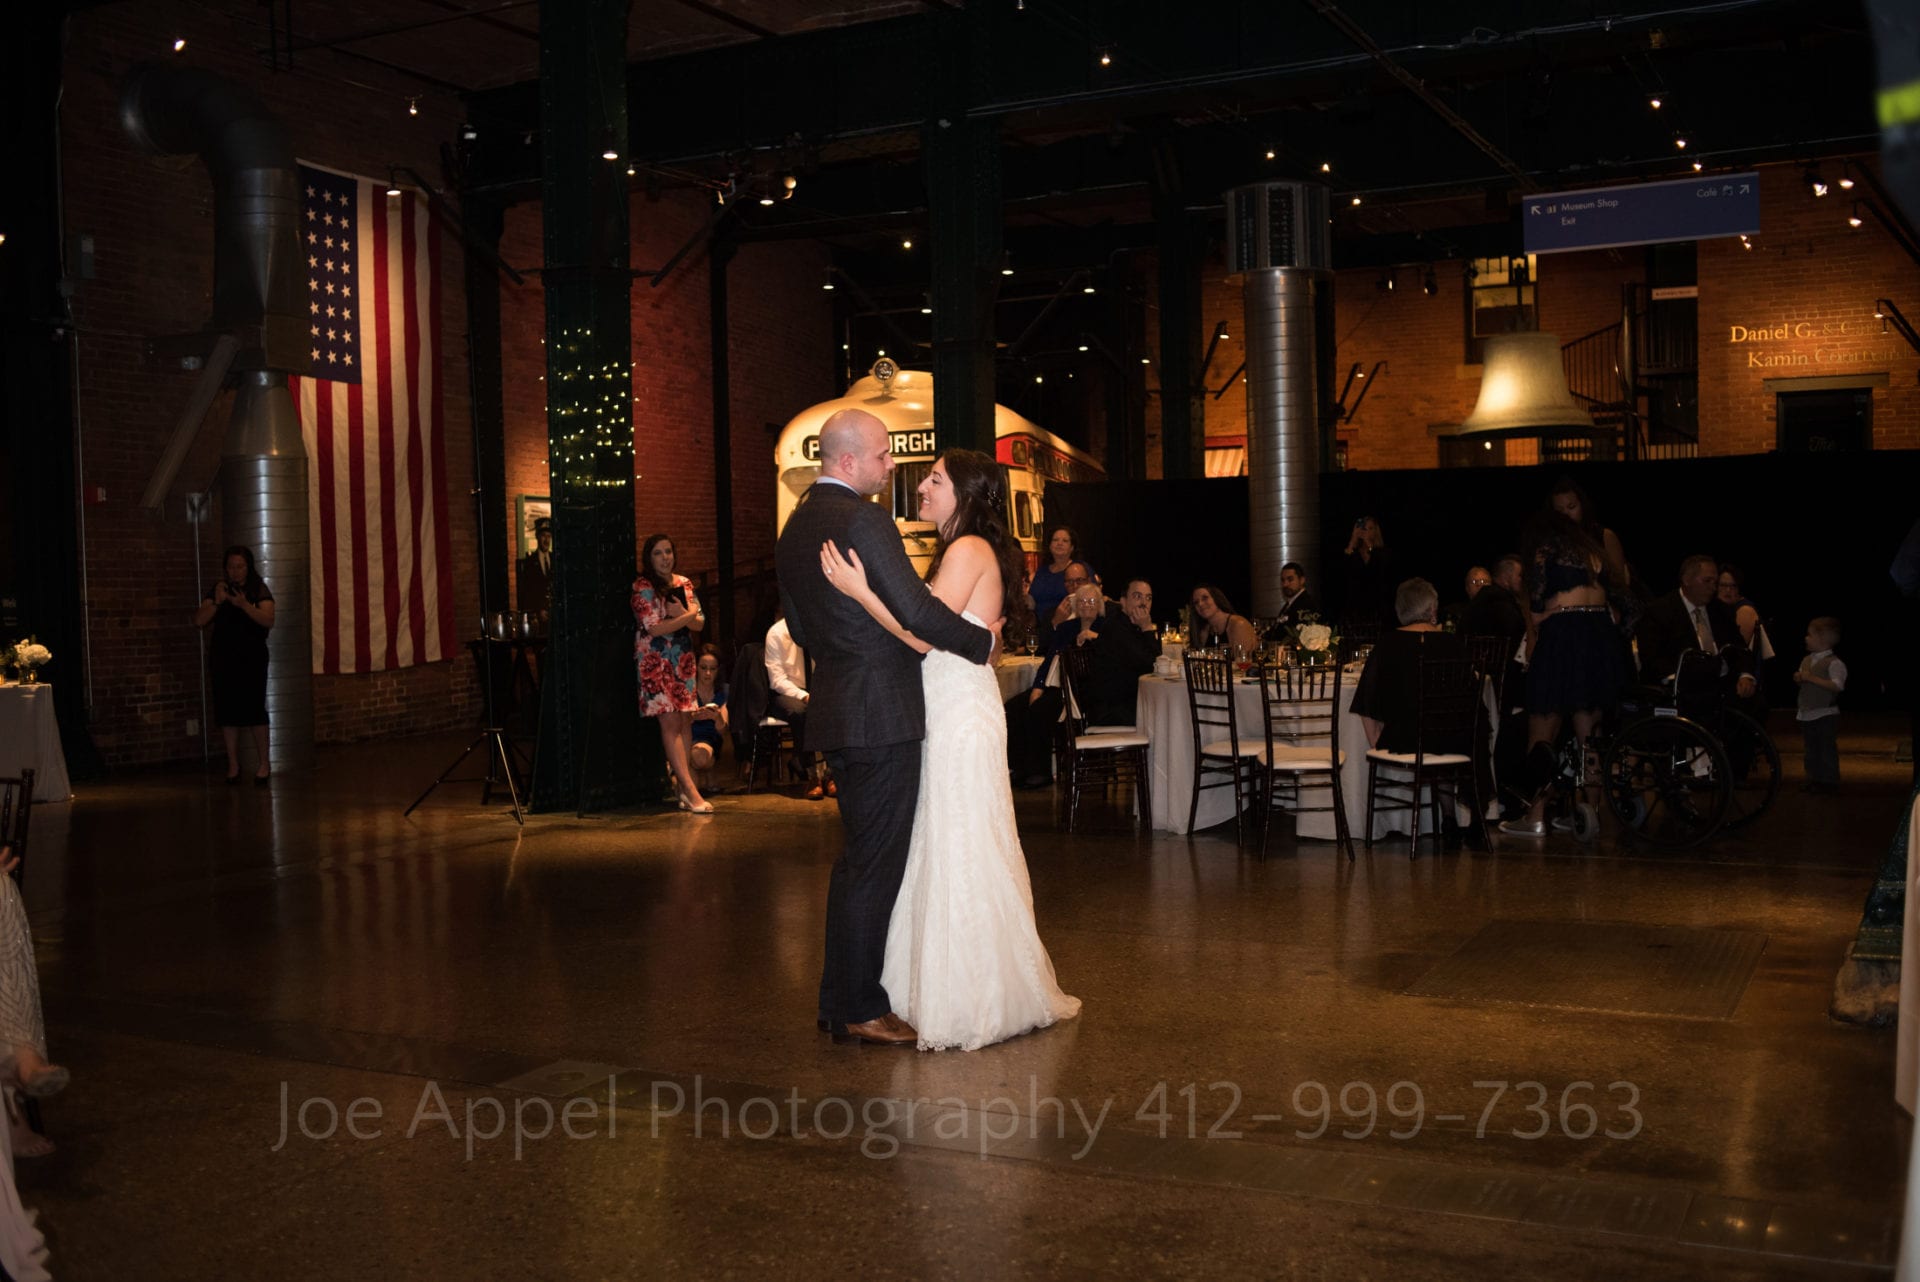 Bride and groom dance in the wide open space of the Great Hall at the Heinz History Center